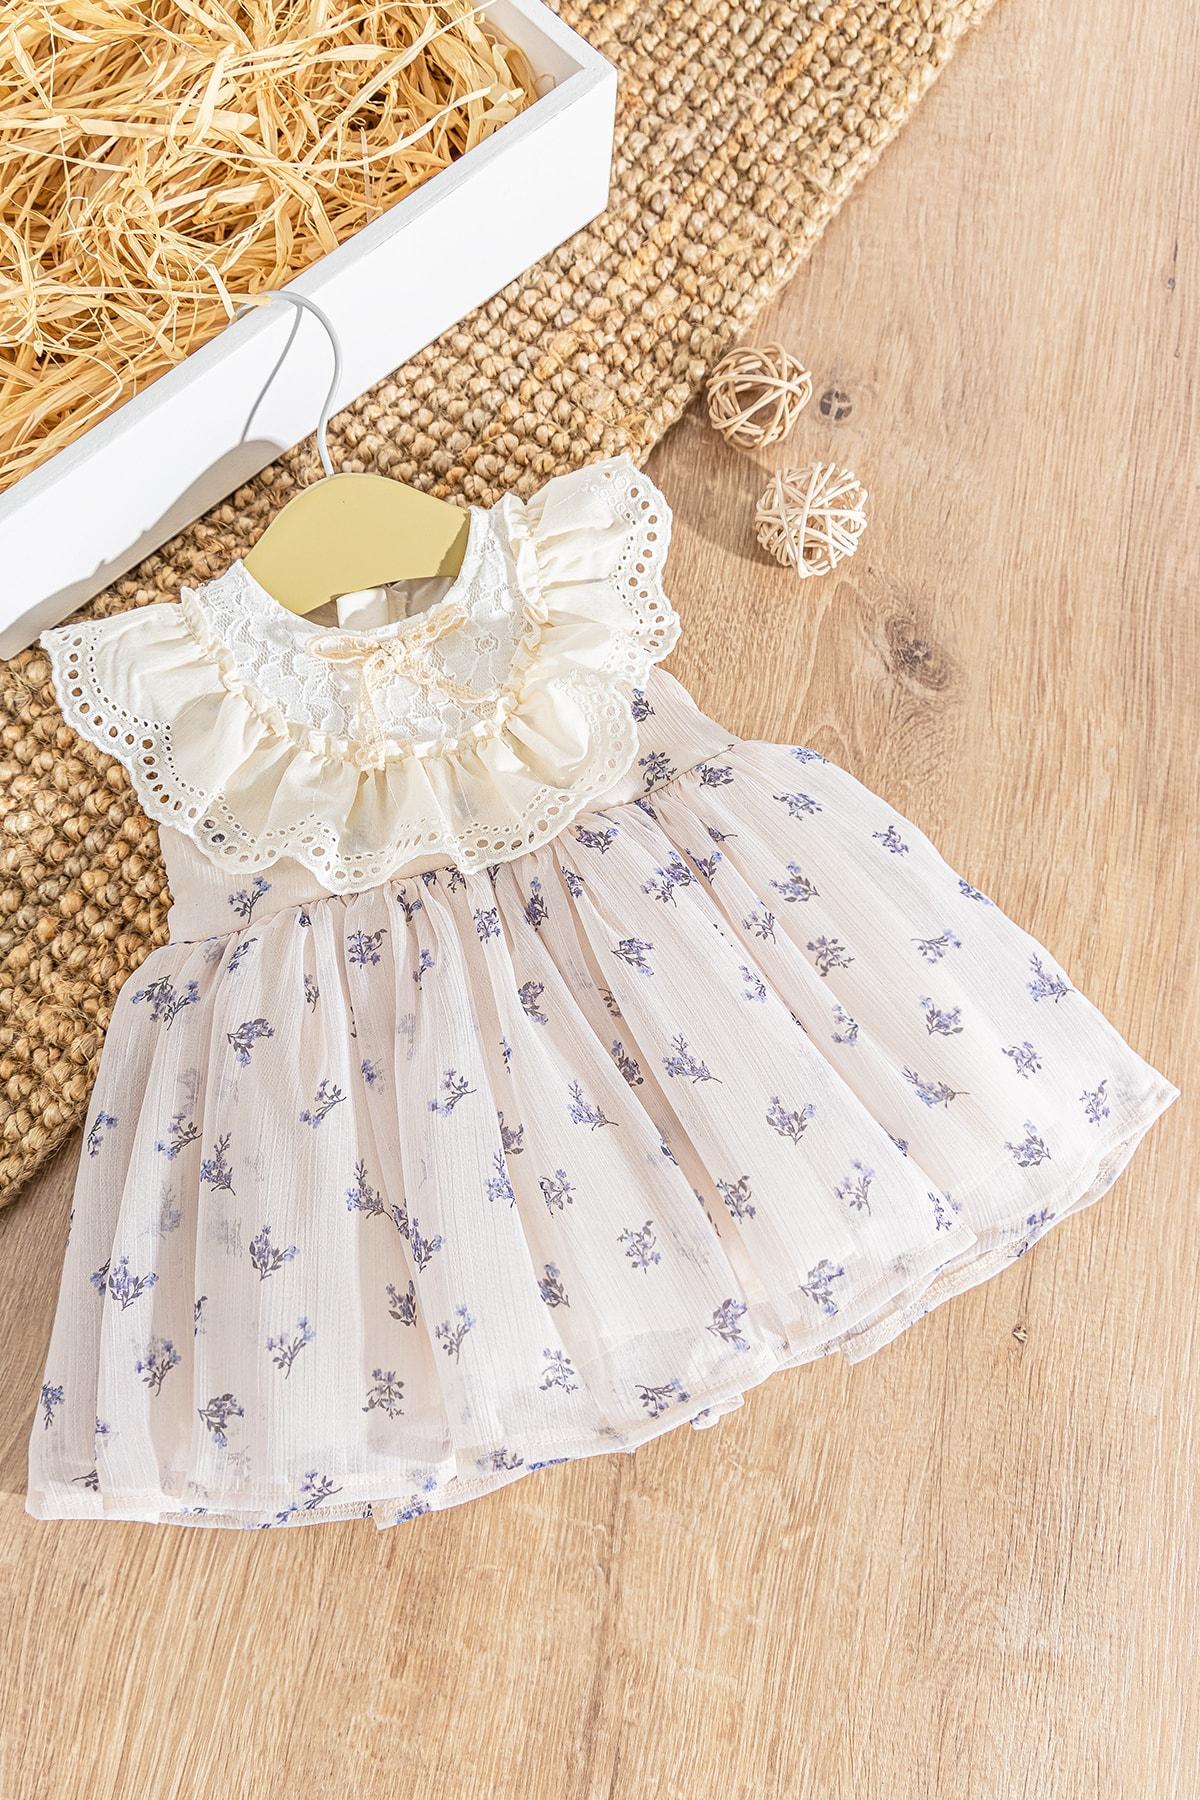 Frm Girl Kids Baby Toddler Dress for Christmas Birthday Newborn Party Princess Dress Children's Clothing